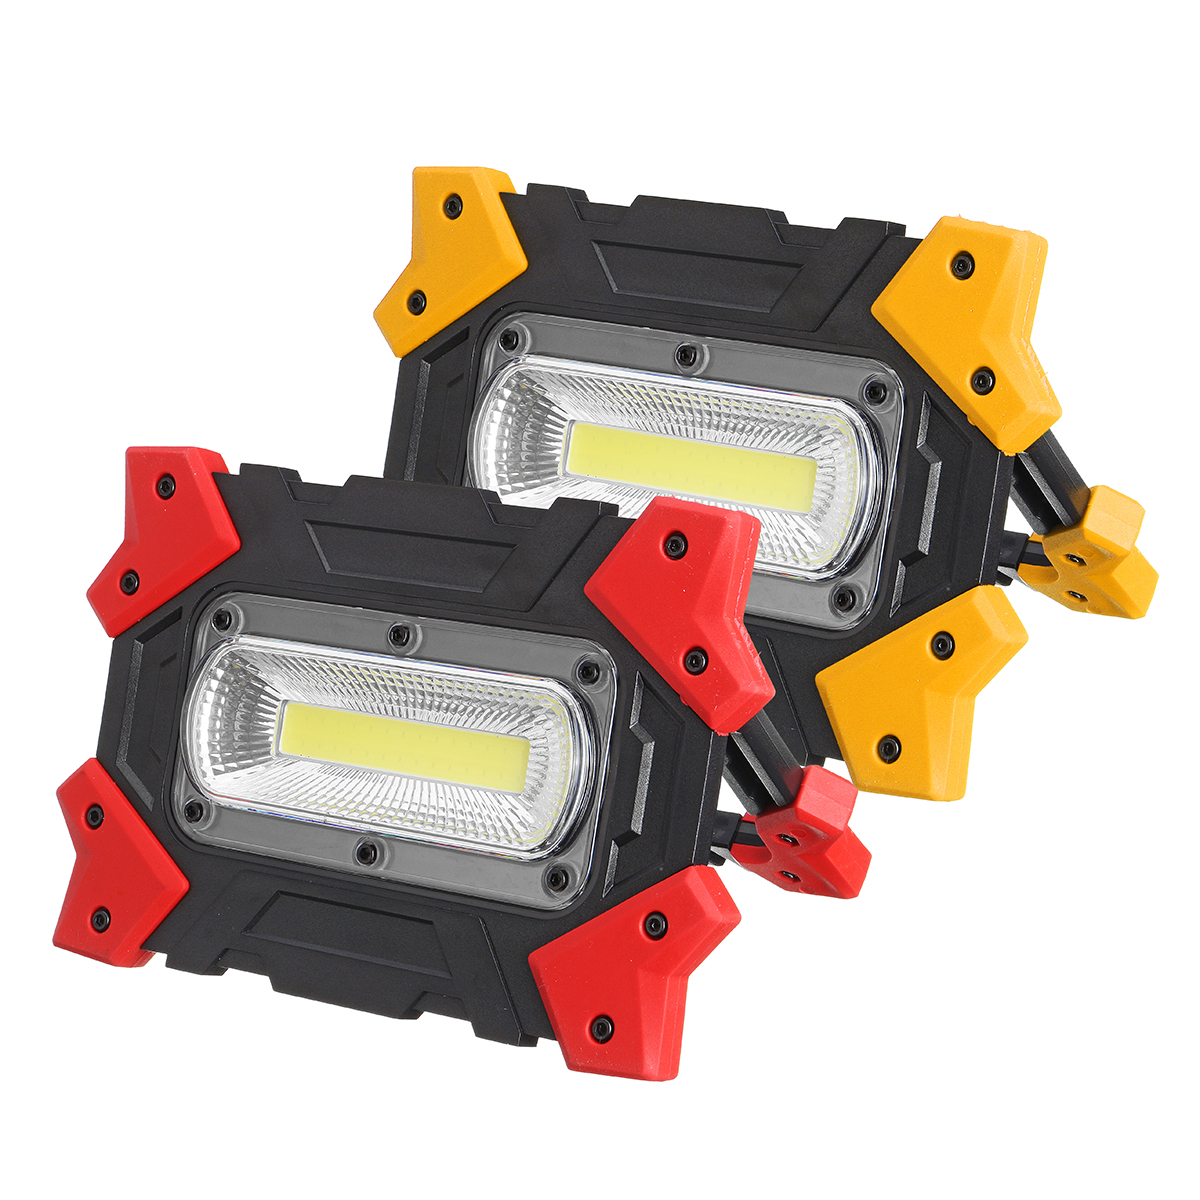 Foldable-COB-LED-Work-Light-Portable-3-Modes-Flood-Lamp-for-Outdoor-Camping-Emergency-1628770-2